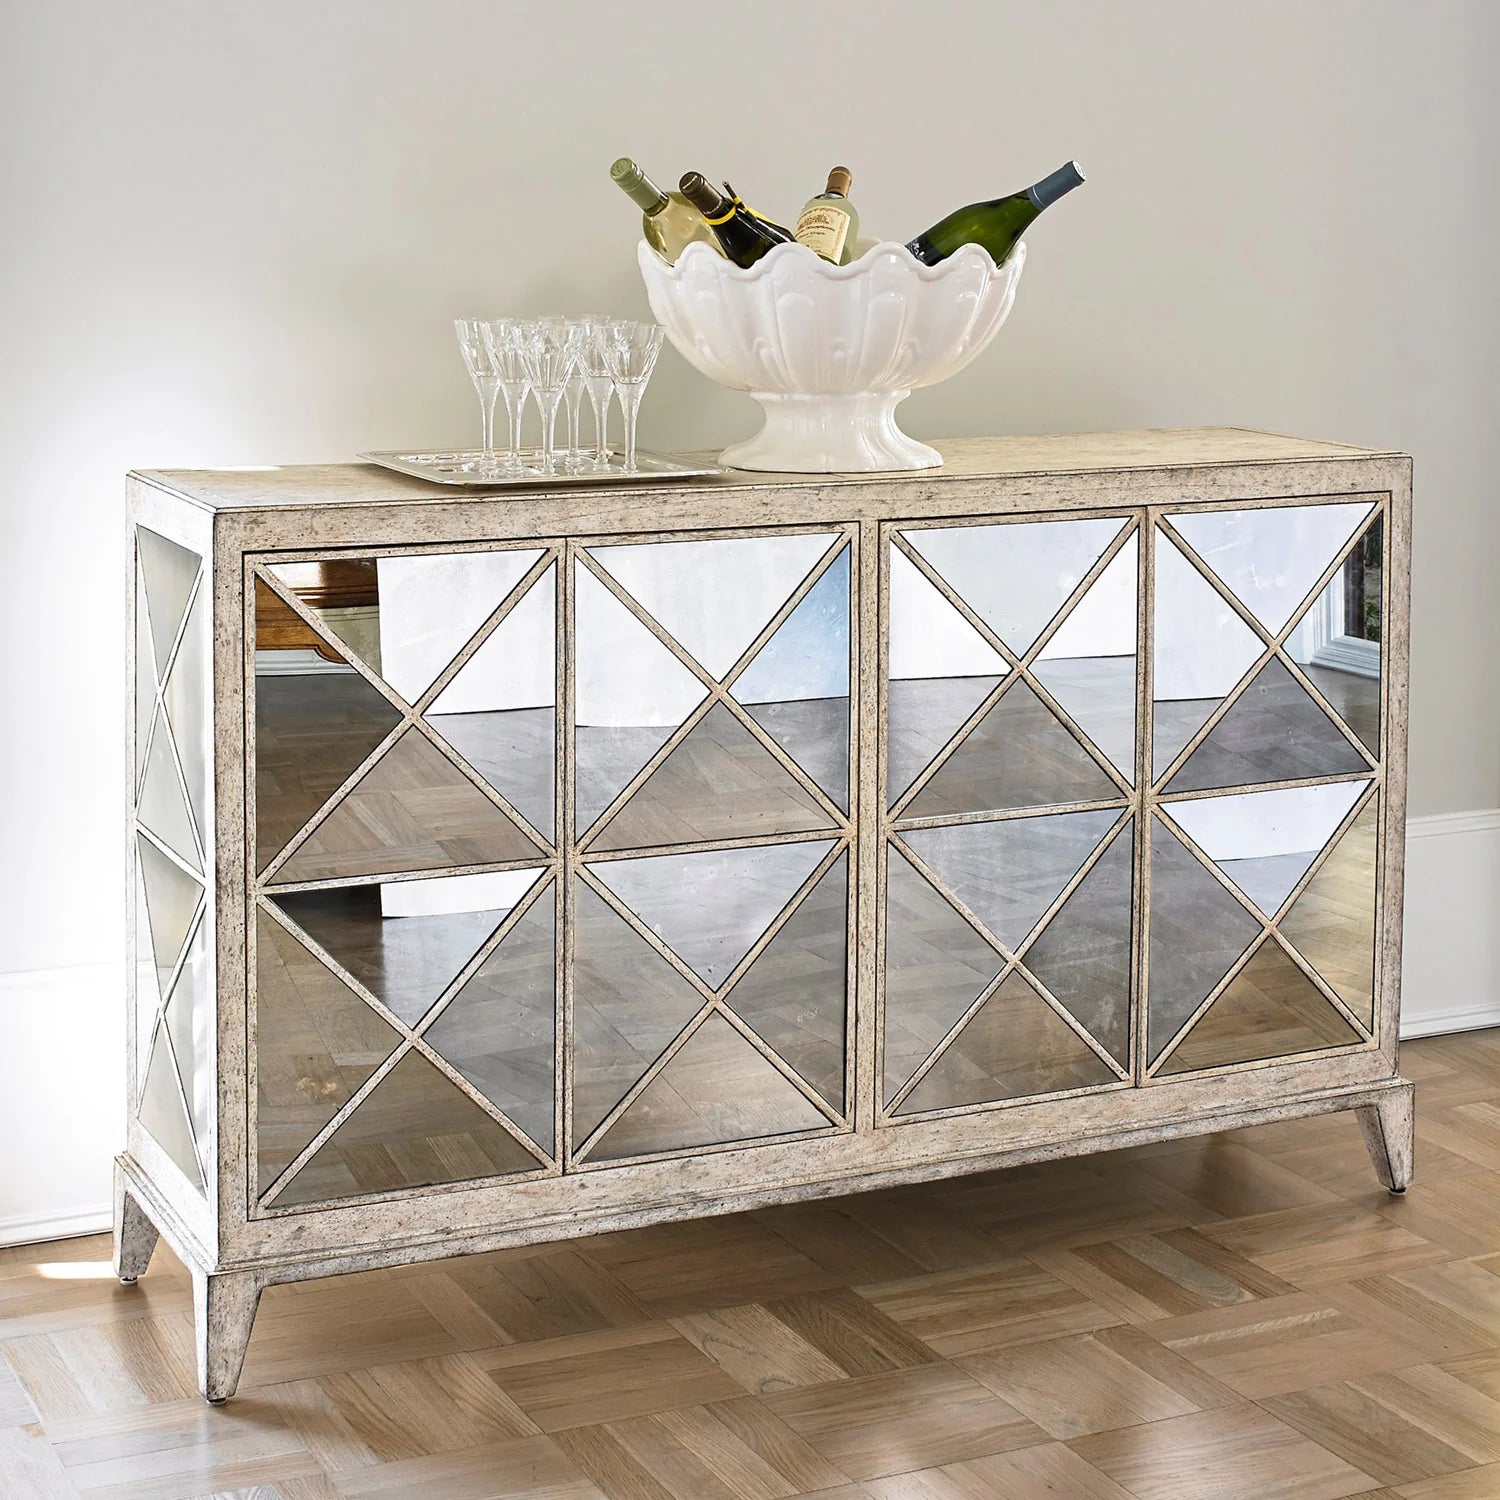 Ambella Home Collection - Escher Sideboard - Furniture Life